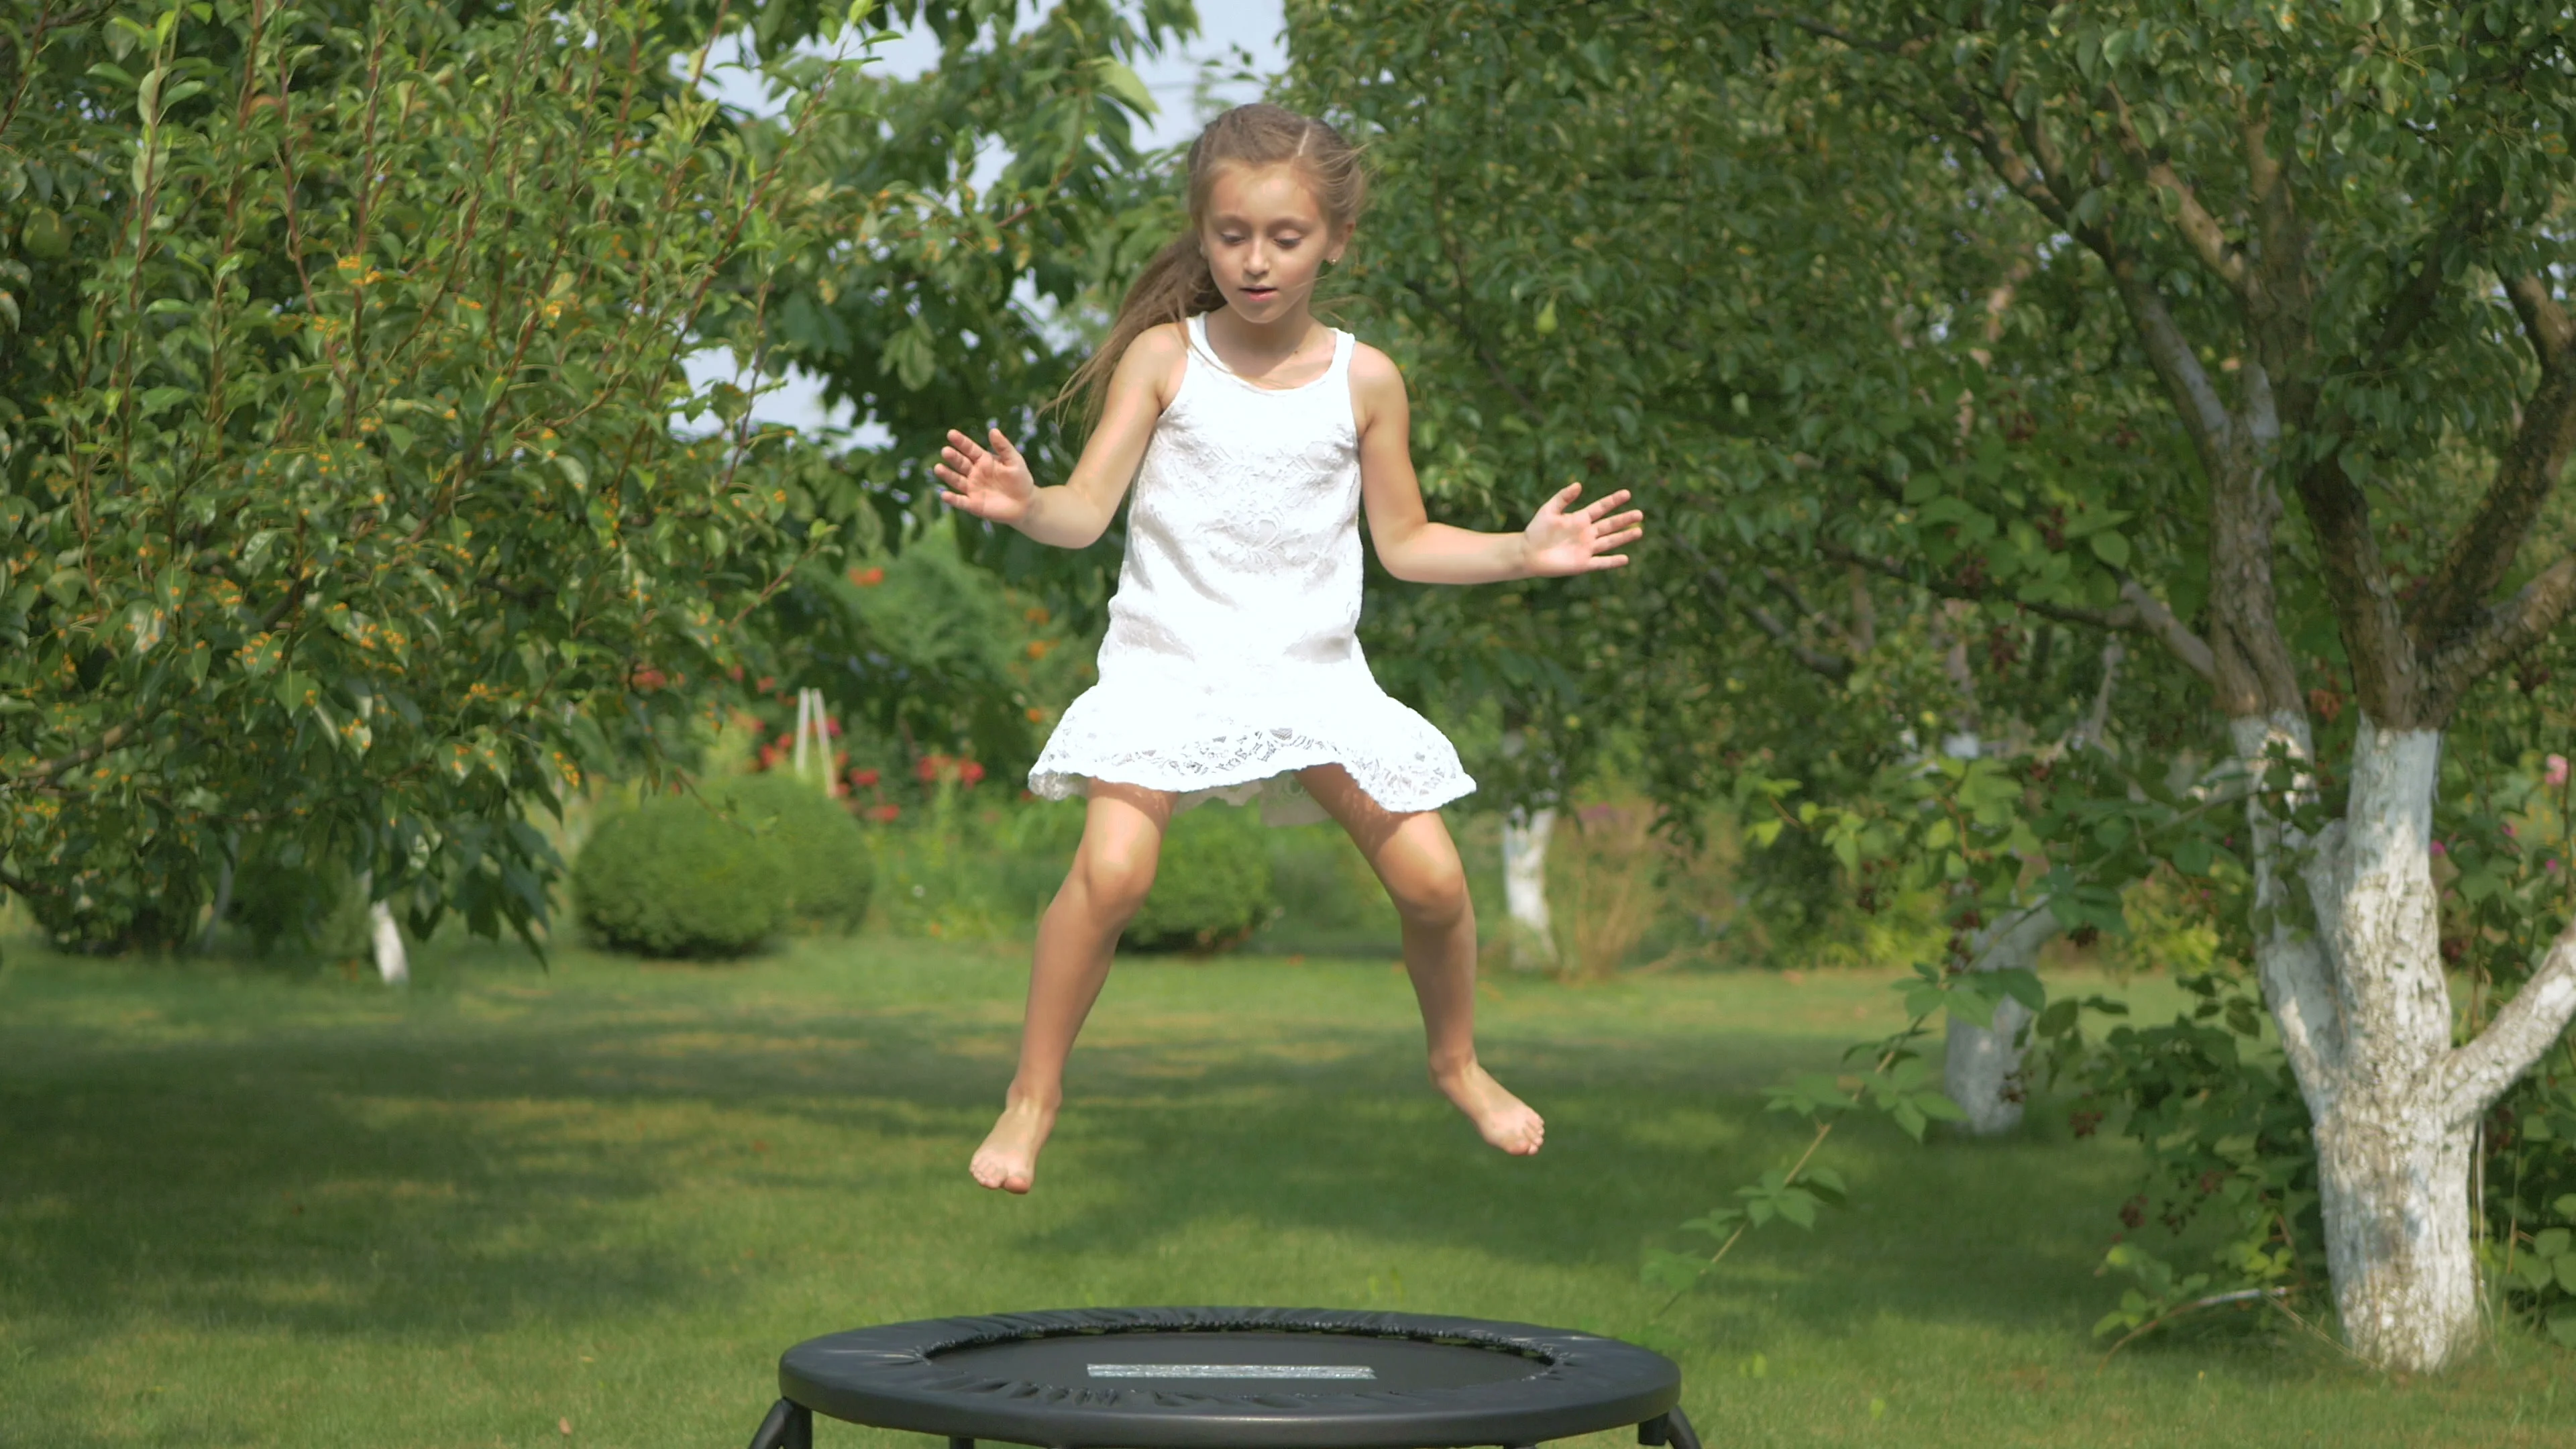 bernadette nealon recommends girls jumping on trampolines pic